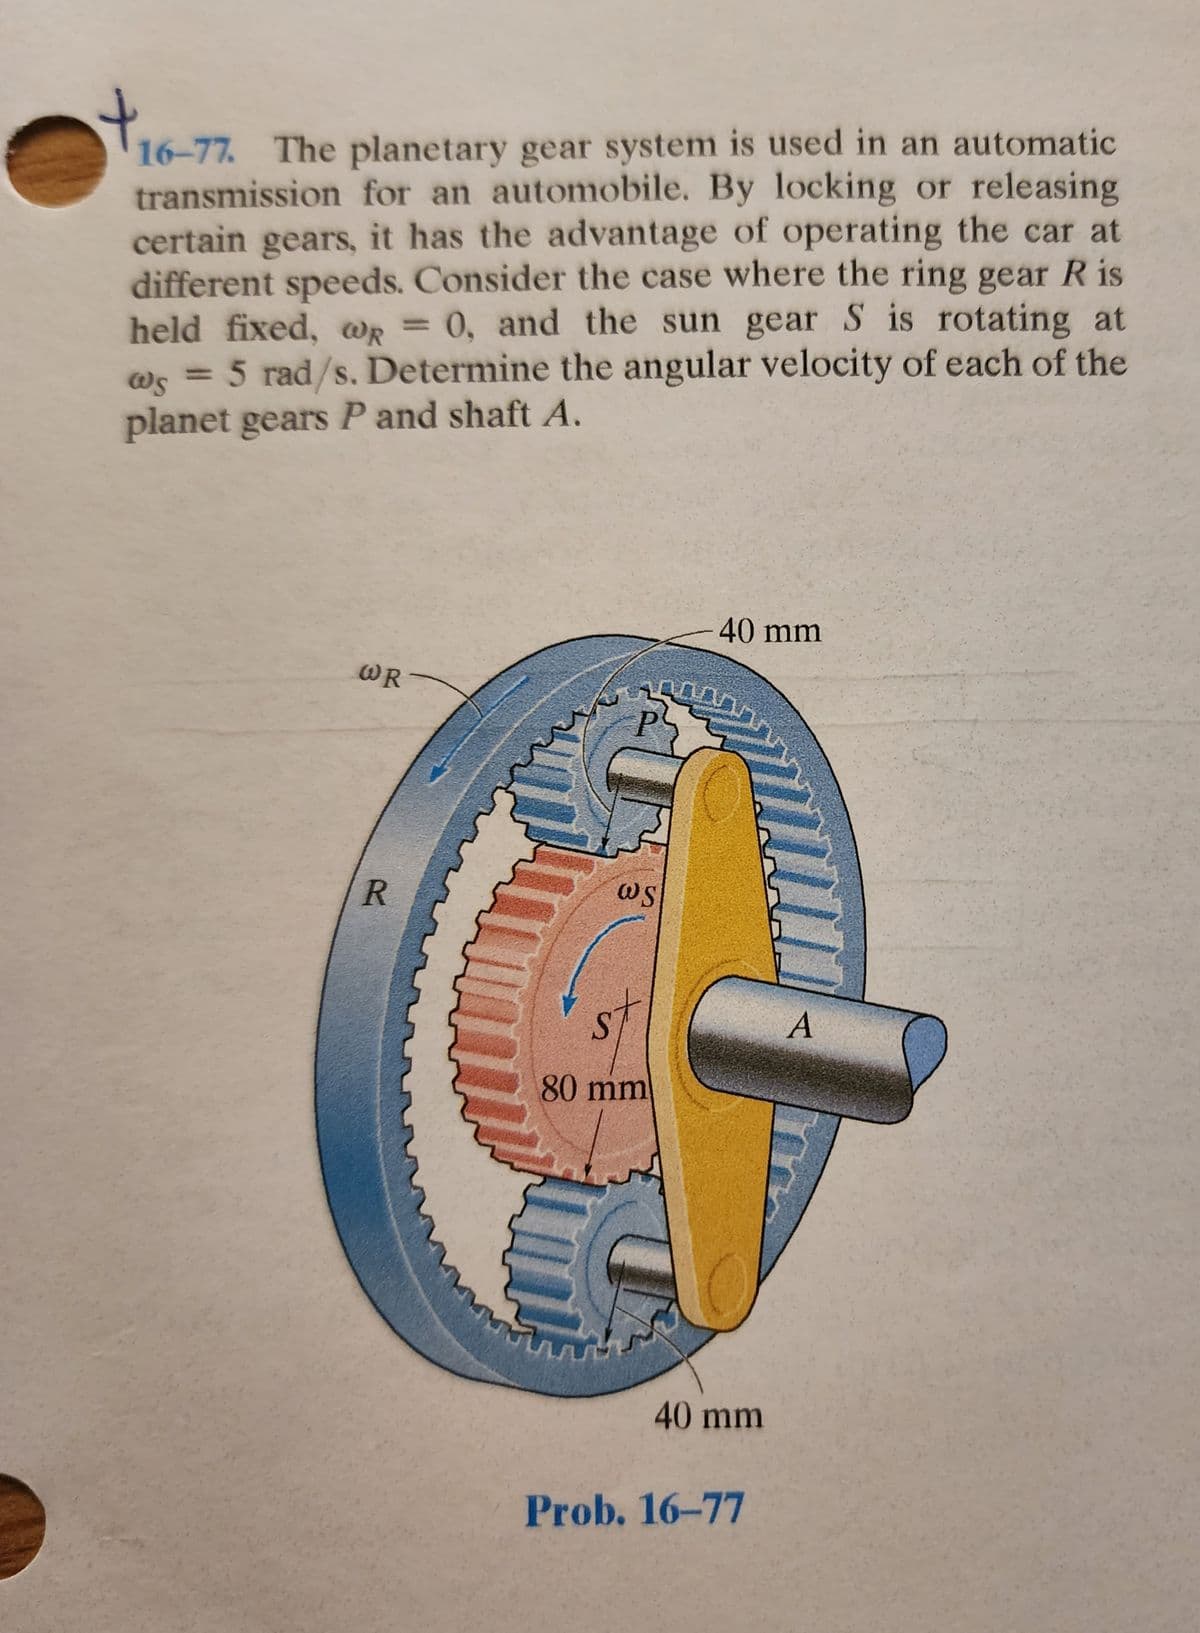 $16-77
16-77. The planetary gear system is used in an automatic
transmission for an automobile. By locking or releasing
certain gears, it has the advantage of operating the car at
different speeds. Consider the case where the ring gear R is
held fixed, wR = 0, and the sun gear S is rotating at
@R
@s = 5 rad/s. Determine the angular velocity of each of the
planet gears P and shaft A.
WR
R
20.000
32
C
ws
40 mm
st
80 mm
40 mm
Prob. 16-77
A